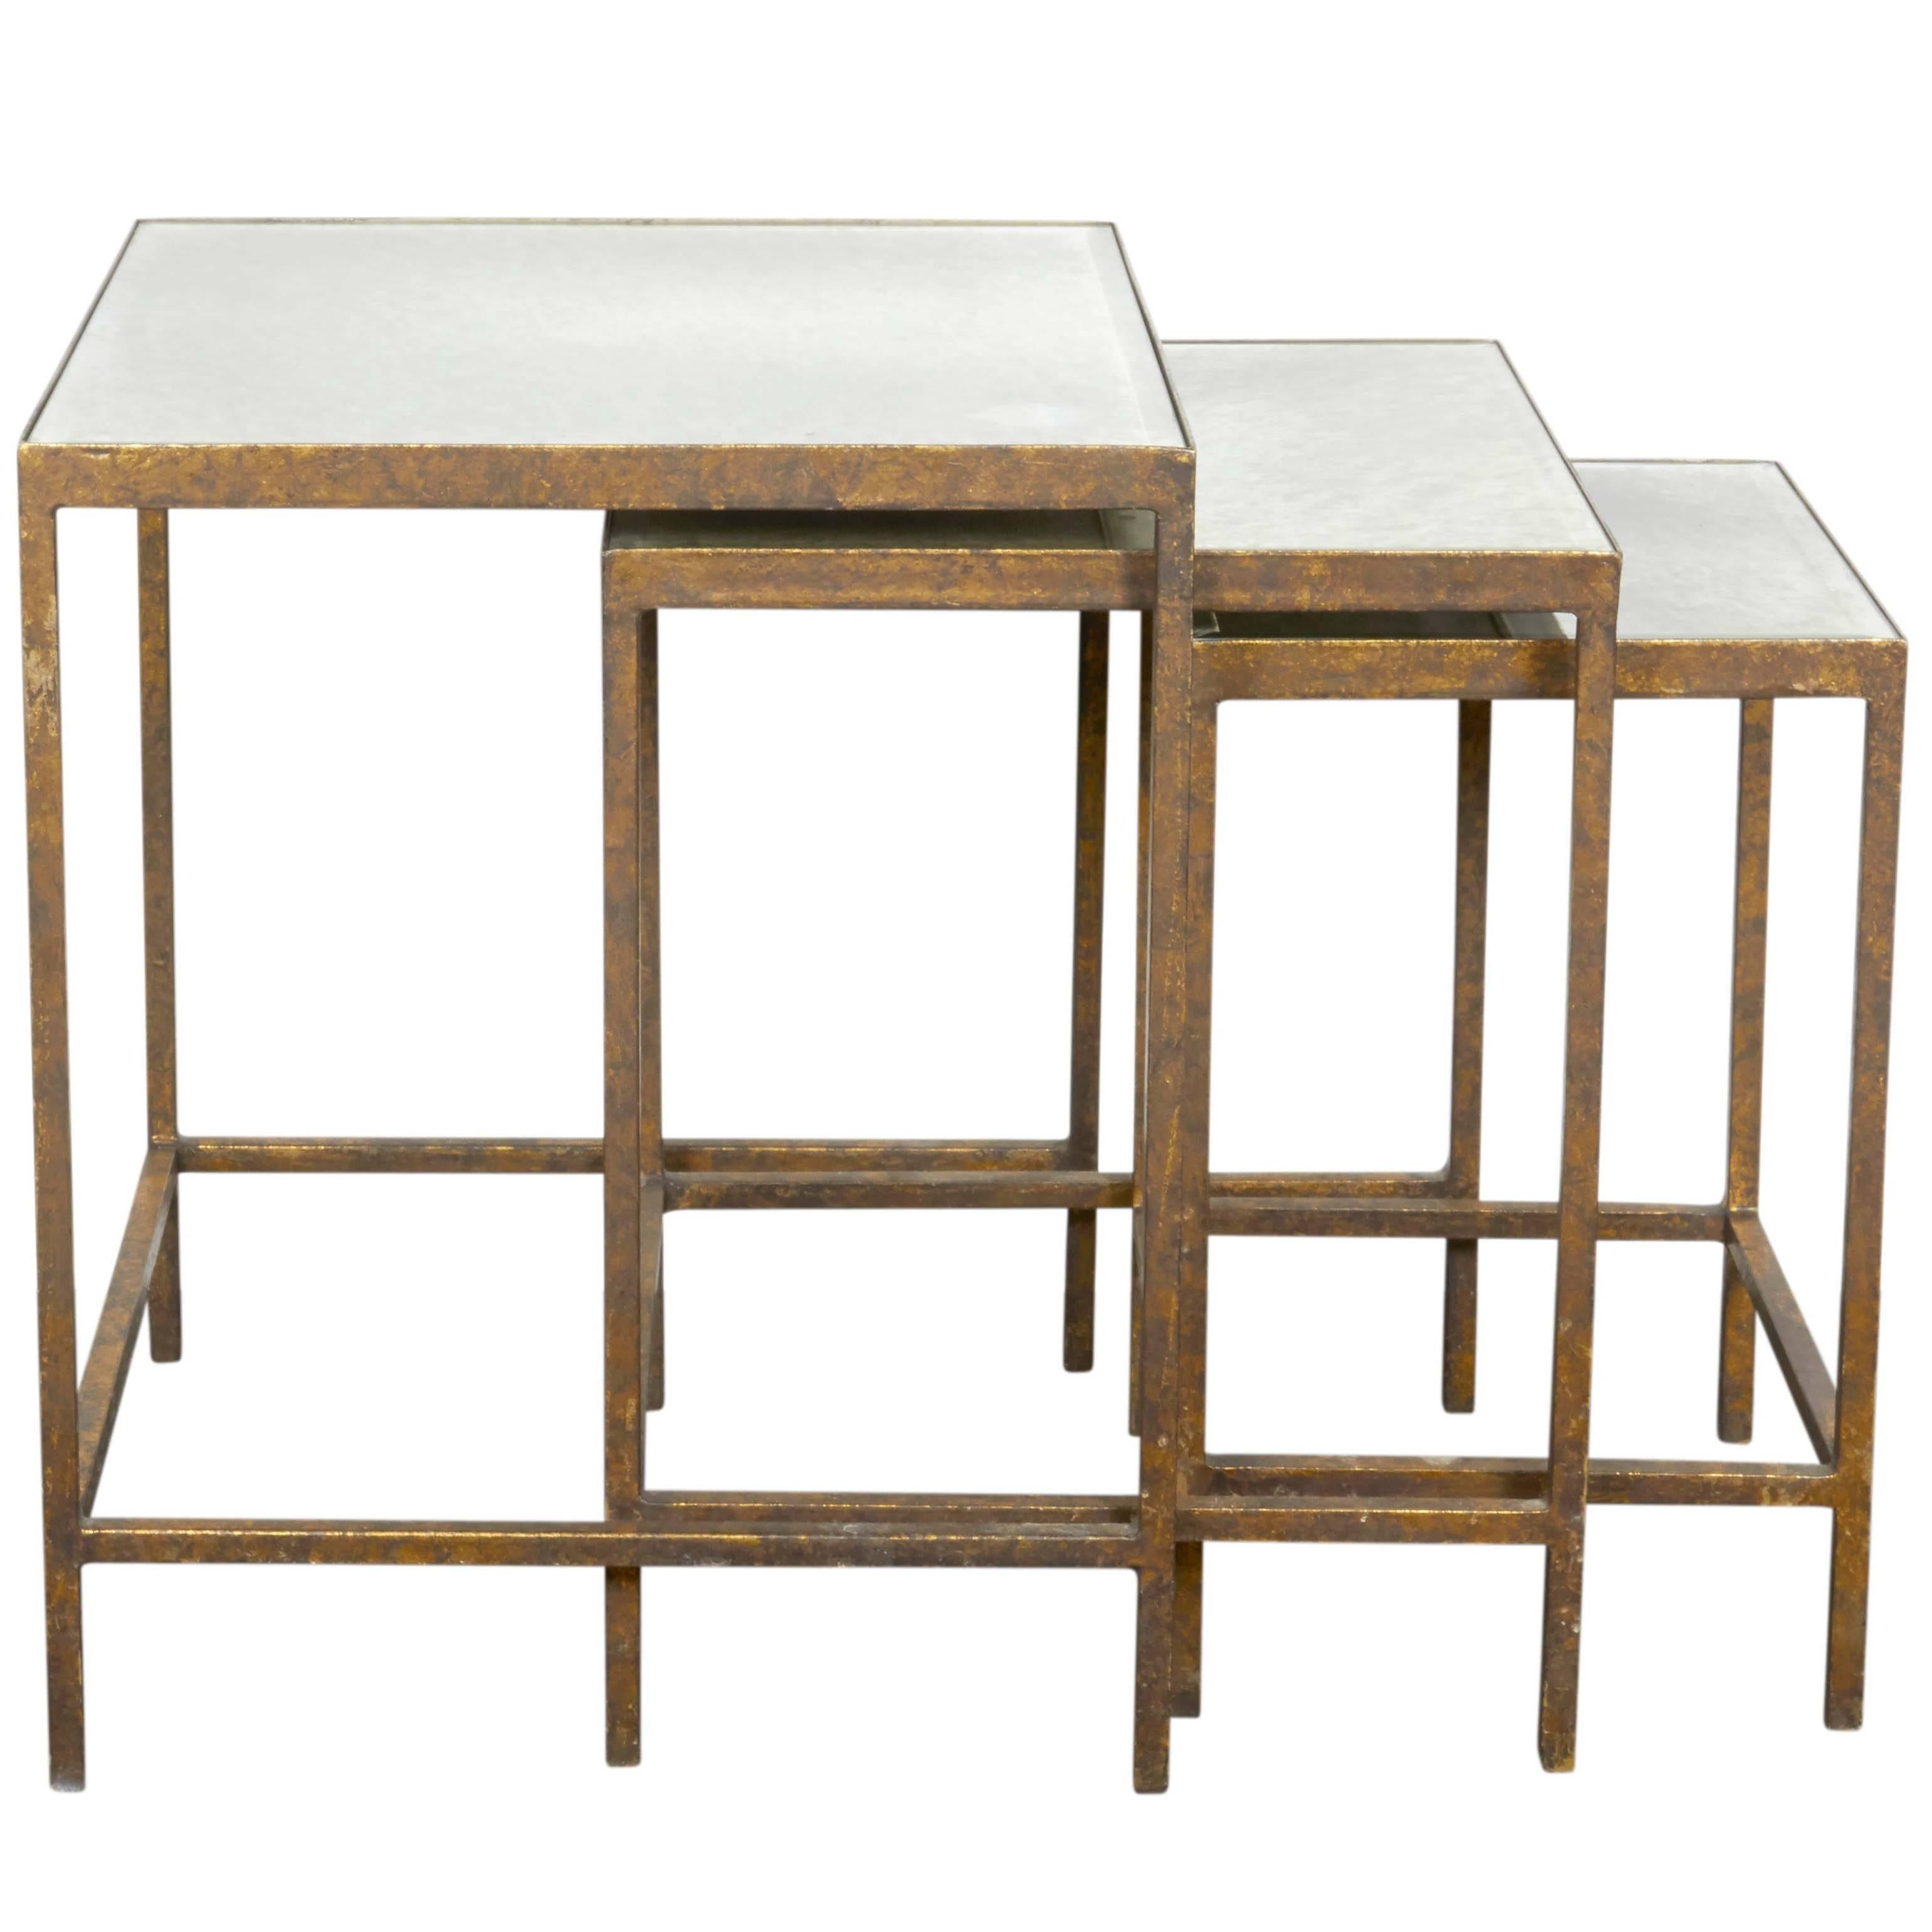 Set of Three Gilt Metal Nesting Tables with Mirrored Tops